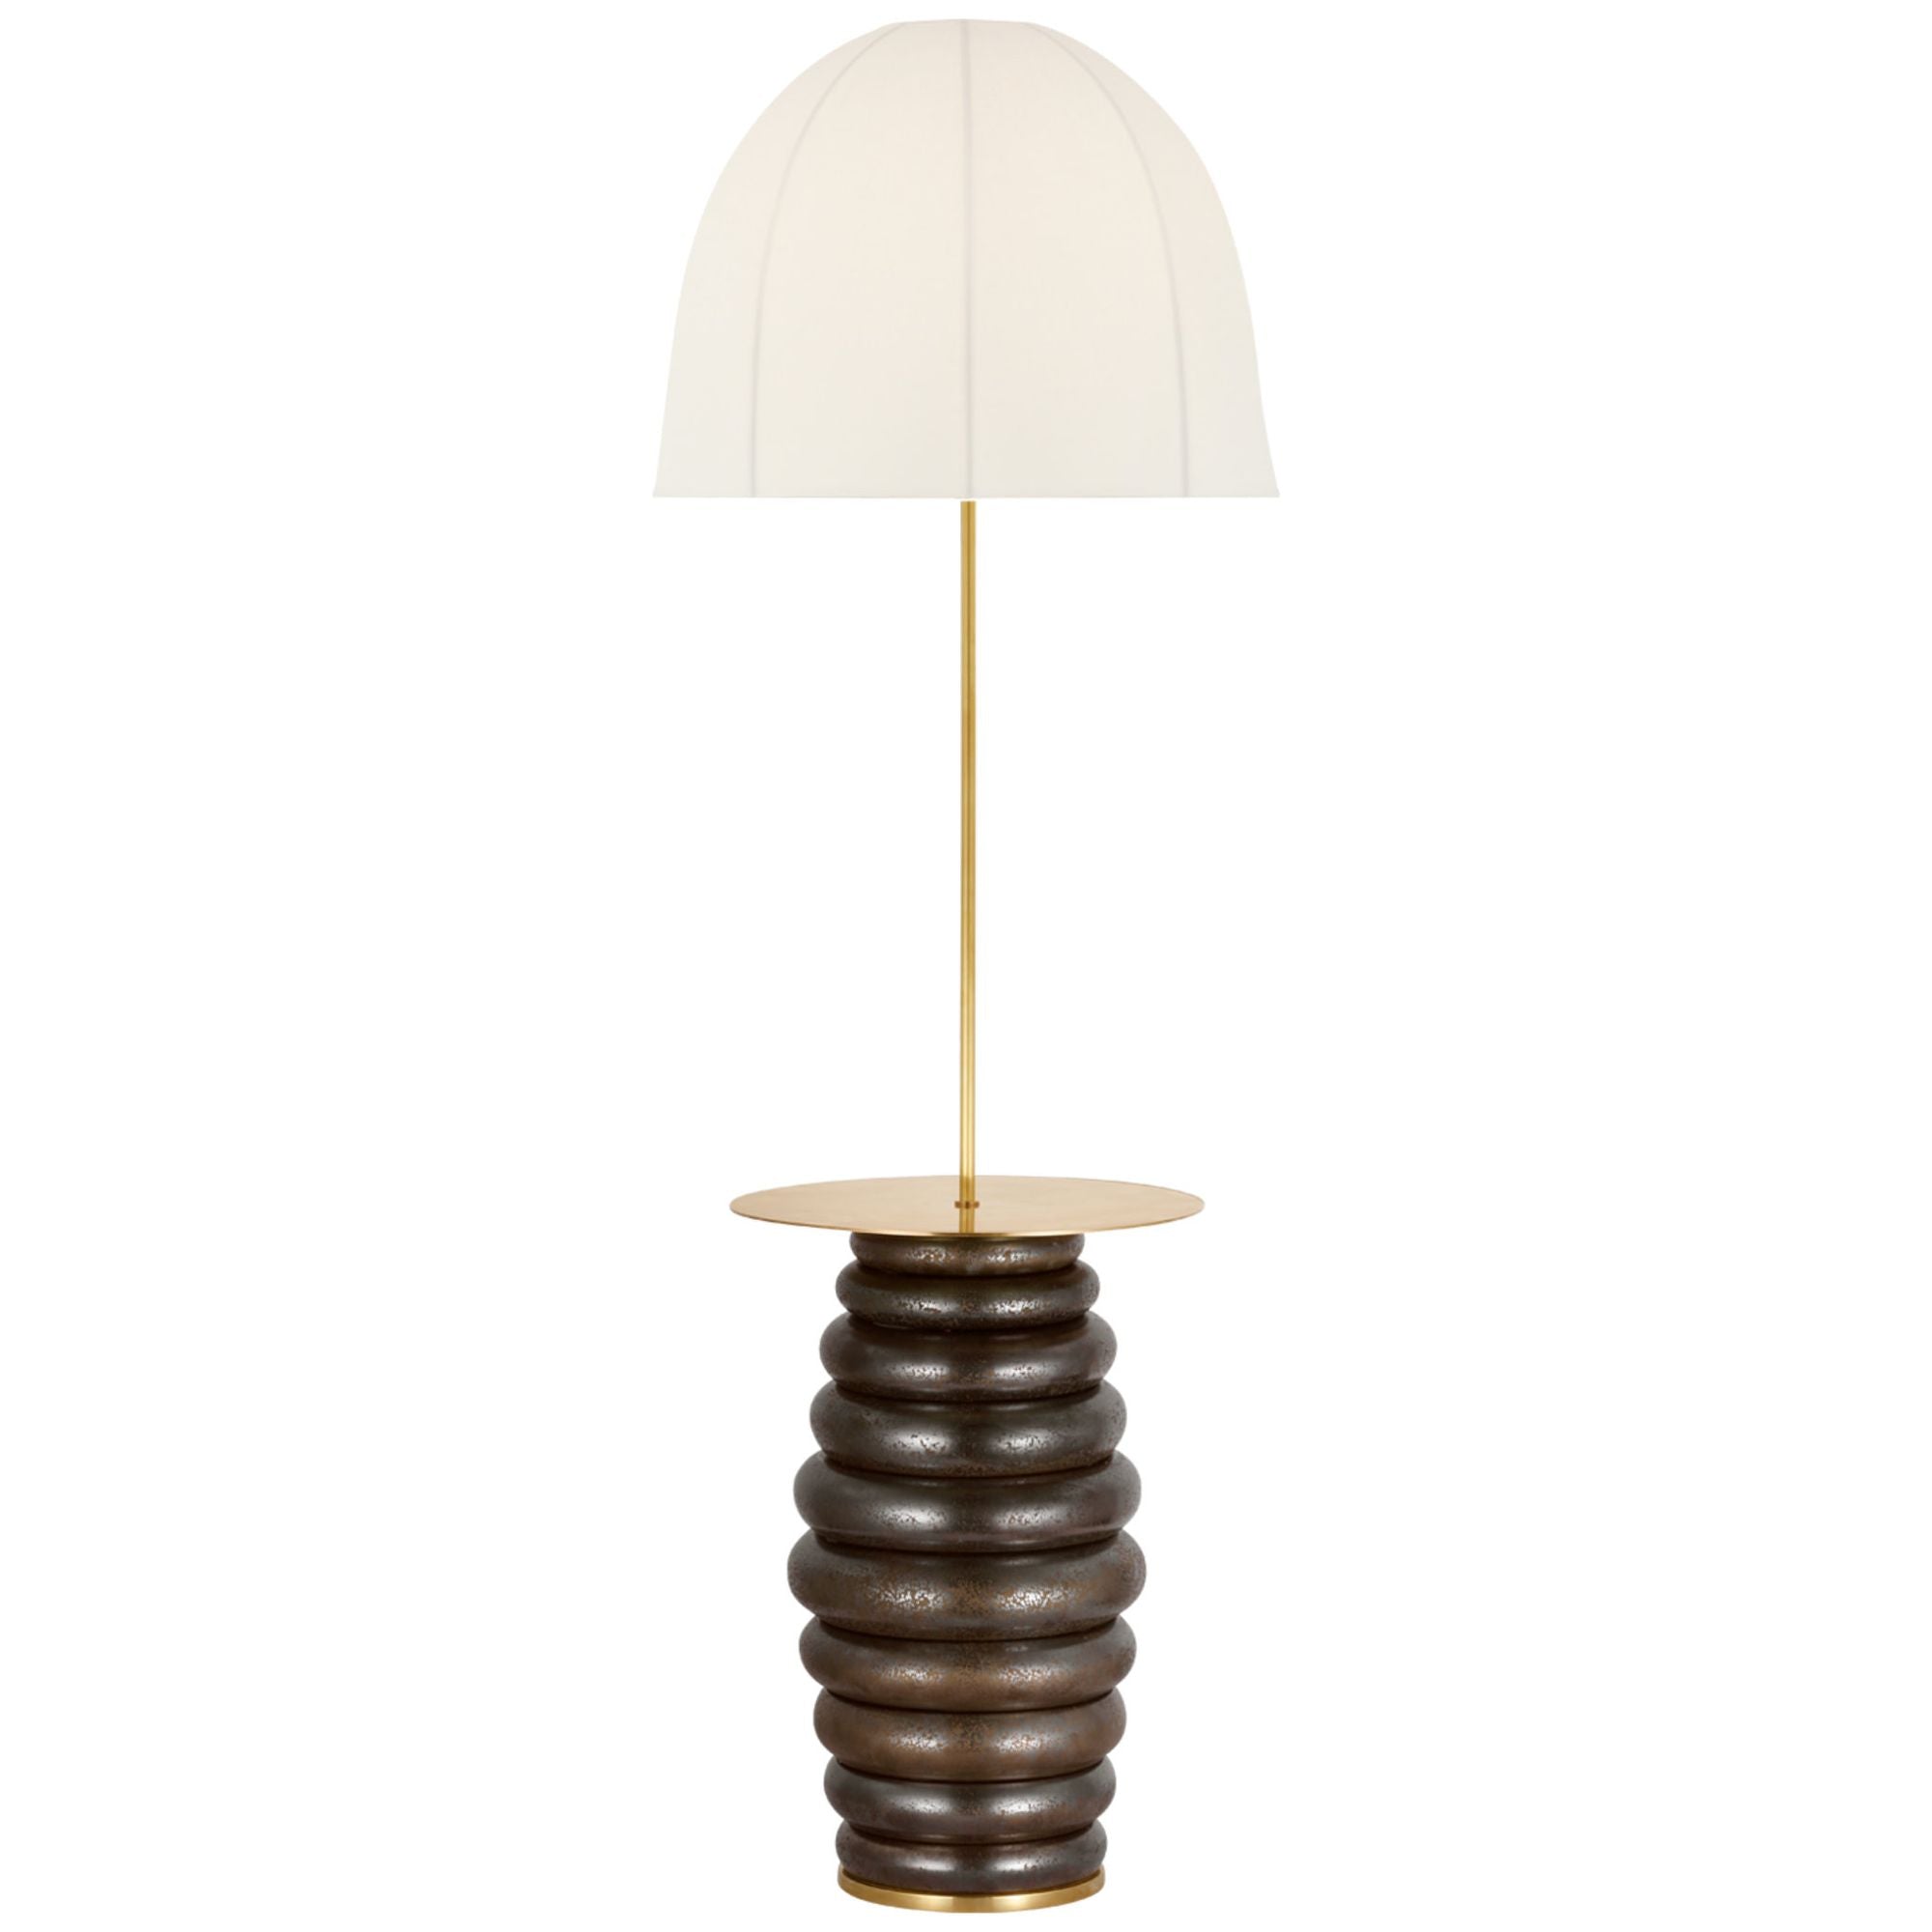 Kelly Wearstler Phoebe Extra Large Tray Table Floor Lamp in Crystal Bronze with Soft Domed Linen Shade